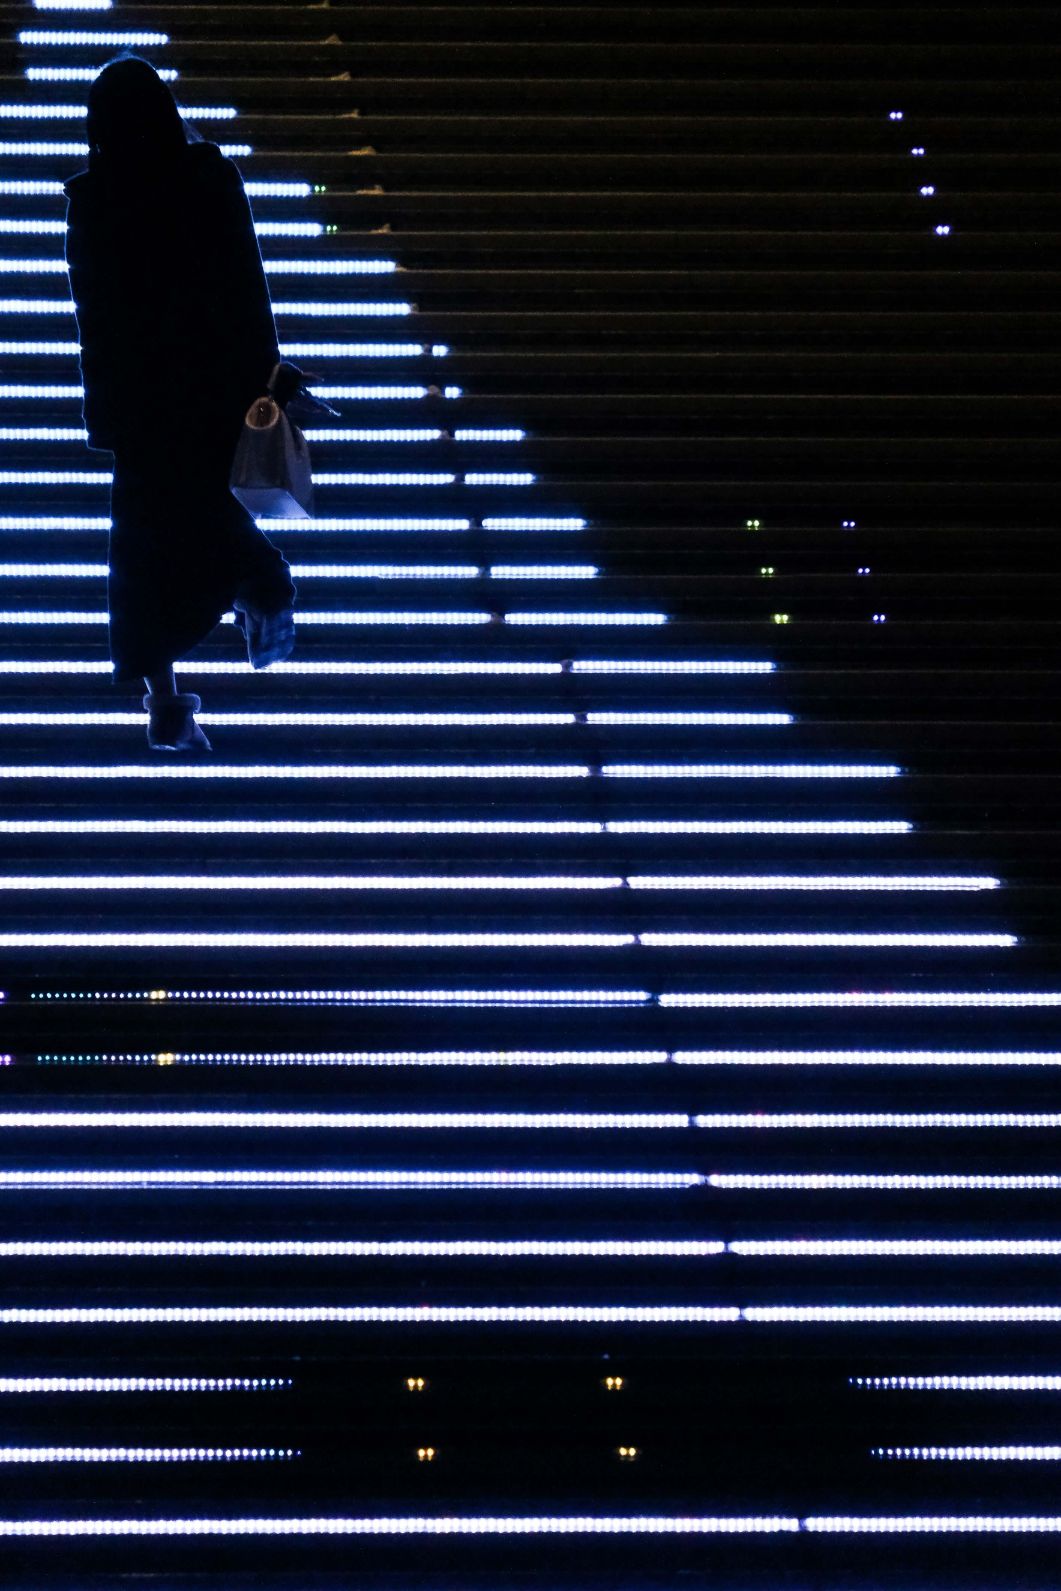 Adjusting your exposure or ‘‘brightness’’ to the most brightest part of the image can result in a very moody image. We exposed for the brightness to the LED lit stairs creating silhouettes.